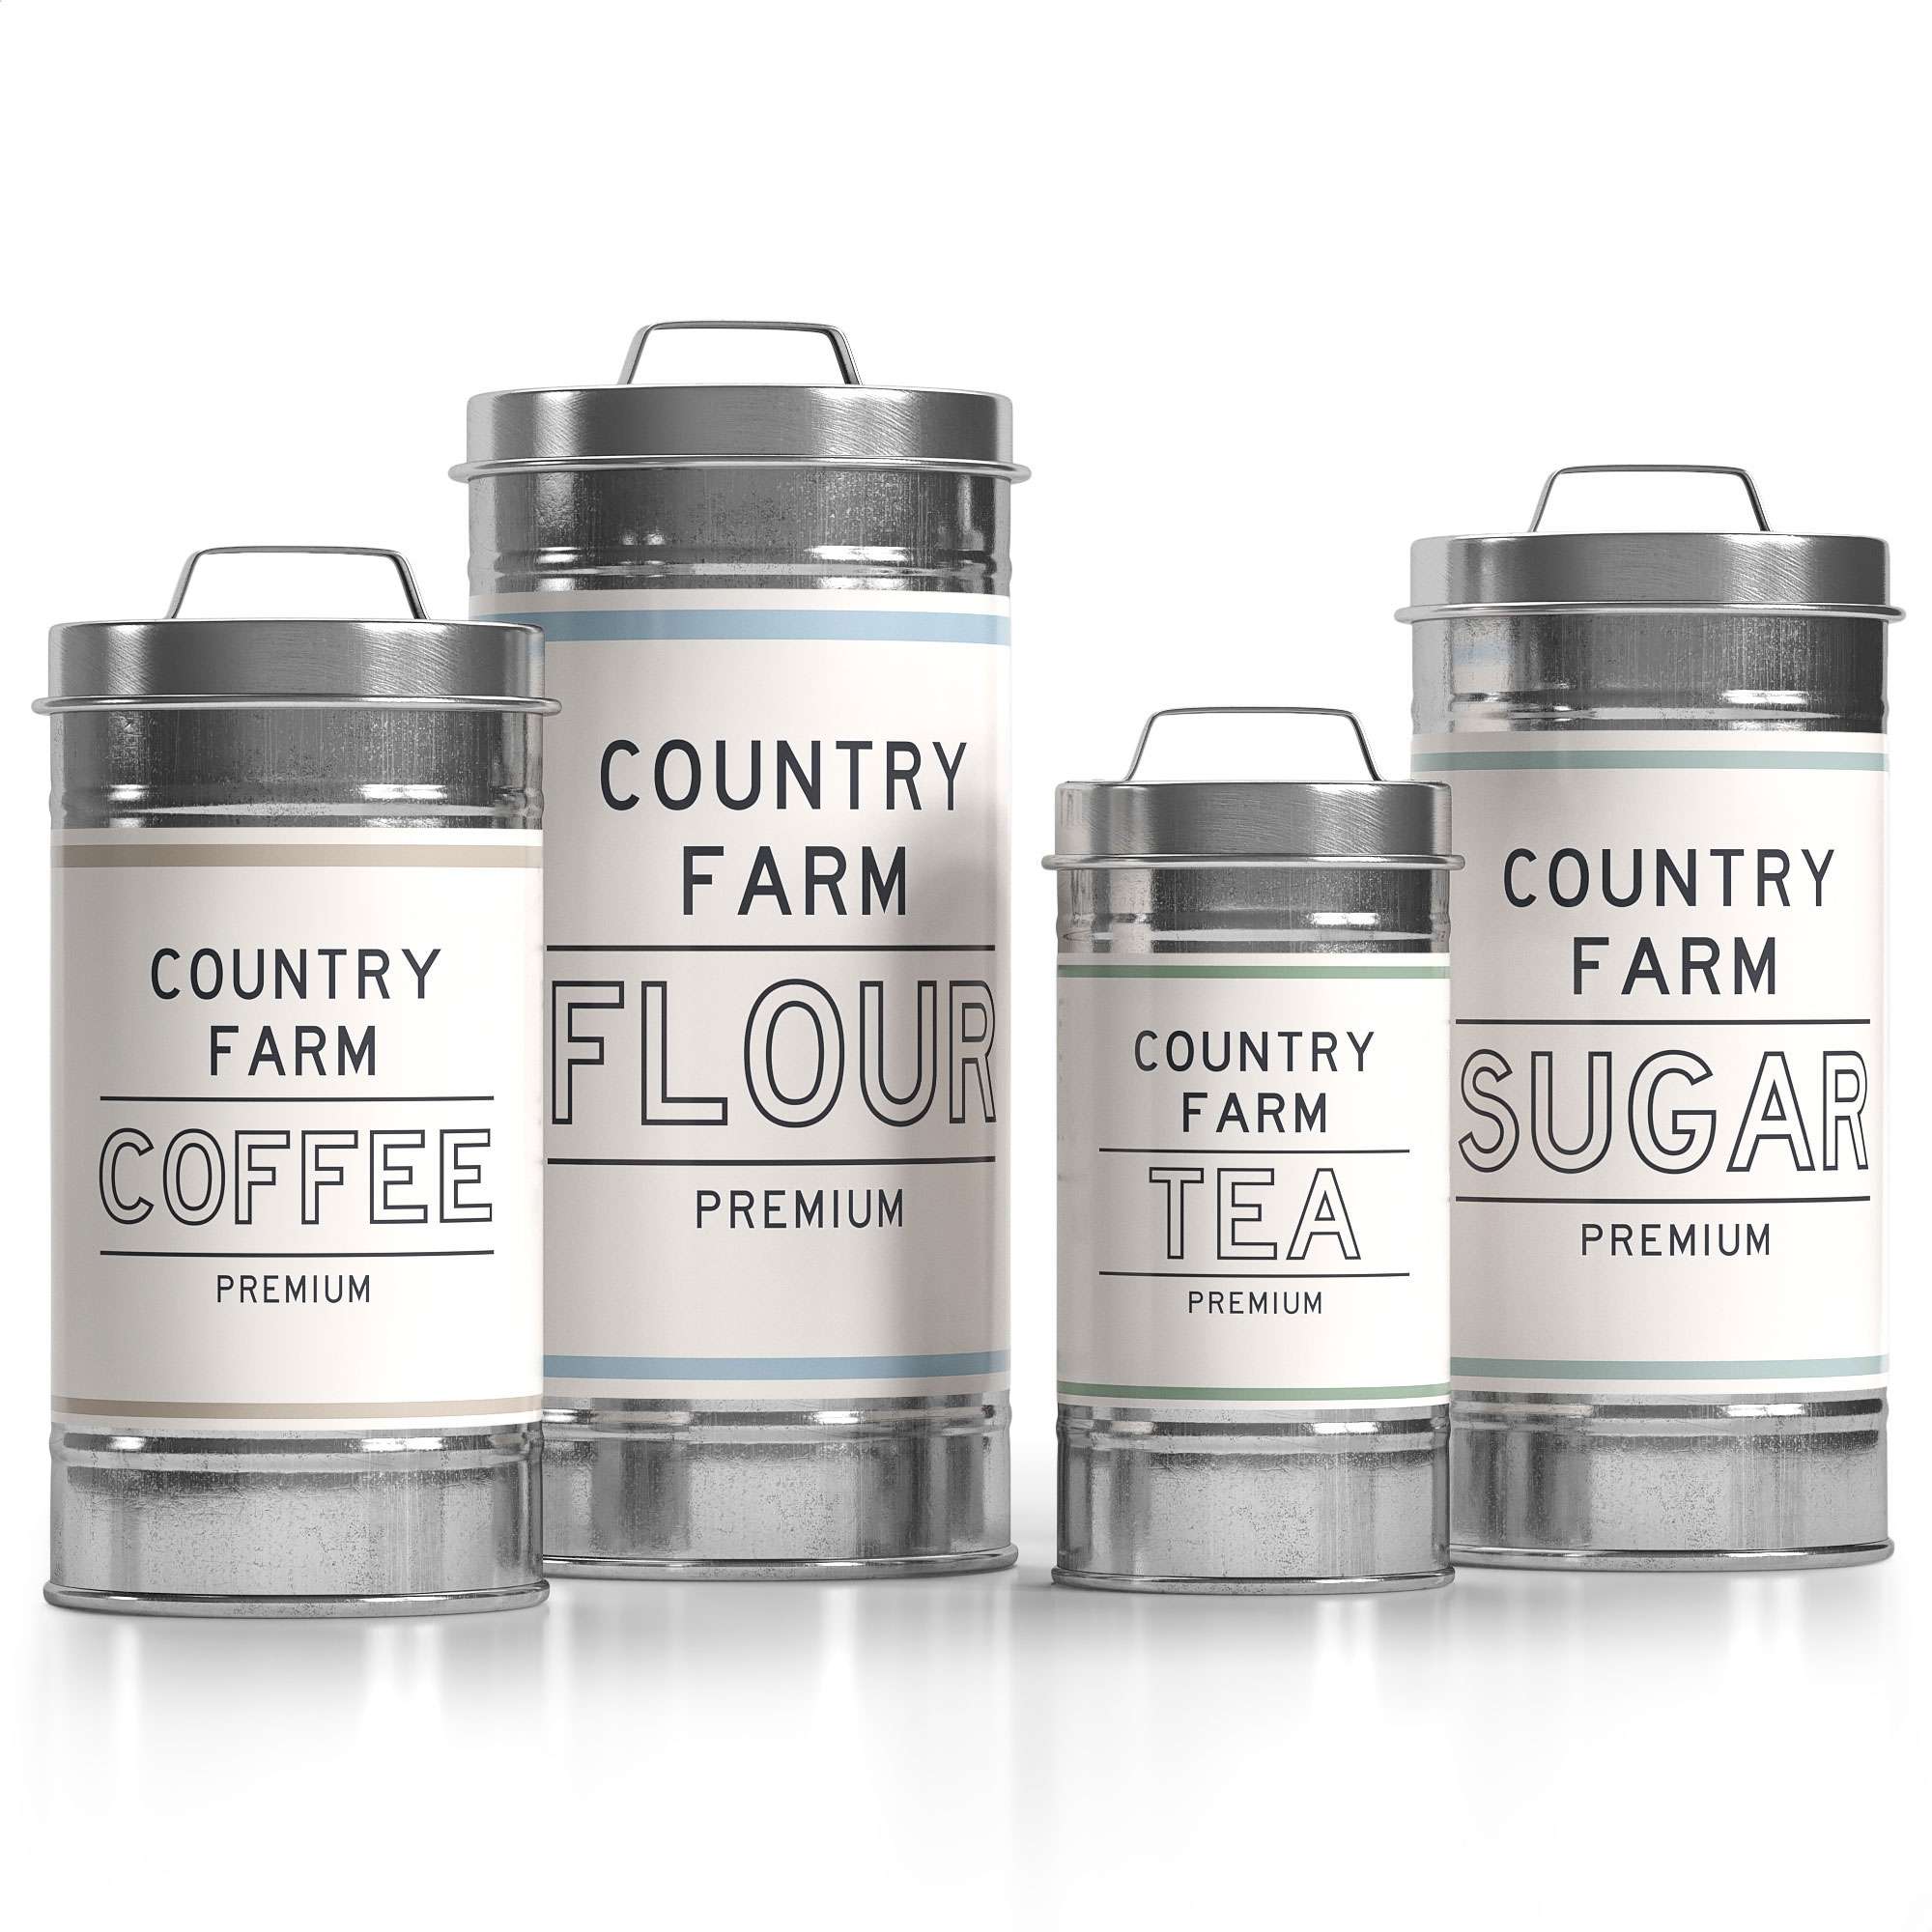 Barnyard Designs Metal Canister Sets for Kitchen Counter Vintage Kitchen Canisters, Country Rustic Farmhouse Decor for the Kitchen, Coffee Tea Sugar Flour Farmhouse Kitchen Decor, Set of 4 - image 1 of 6